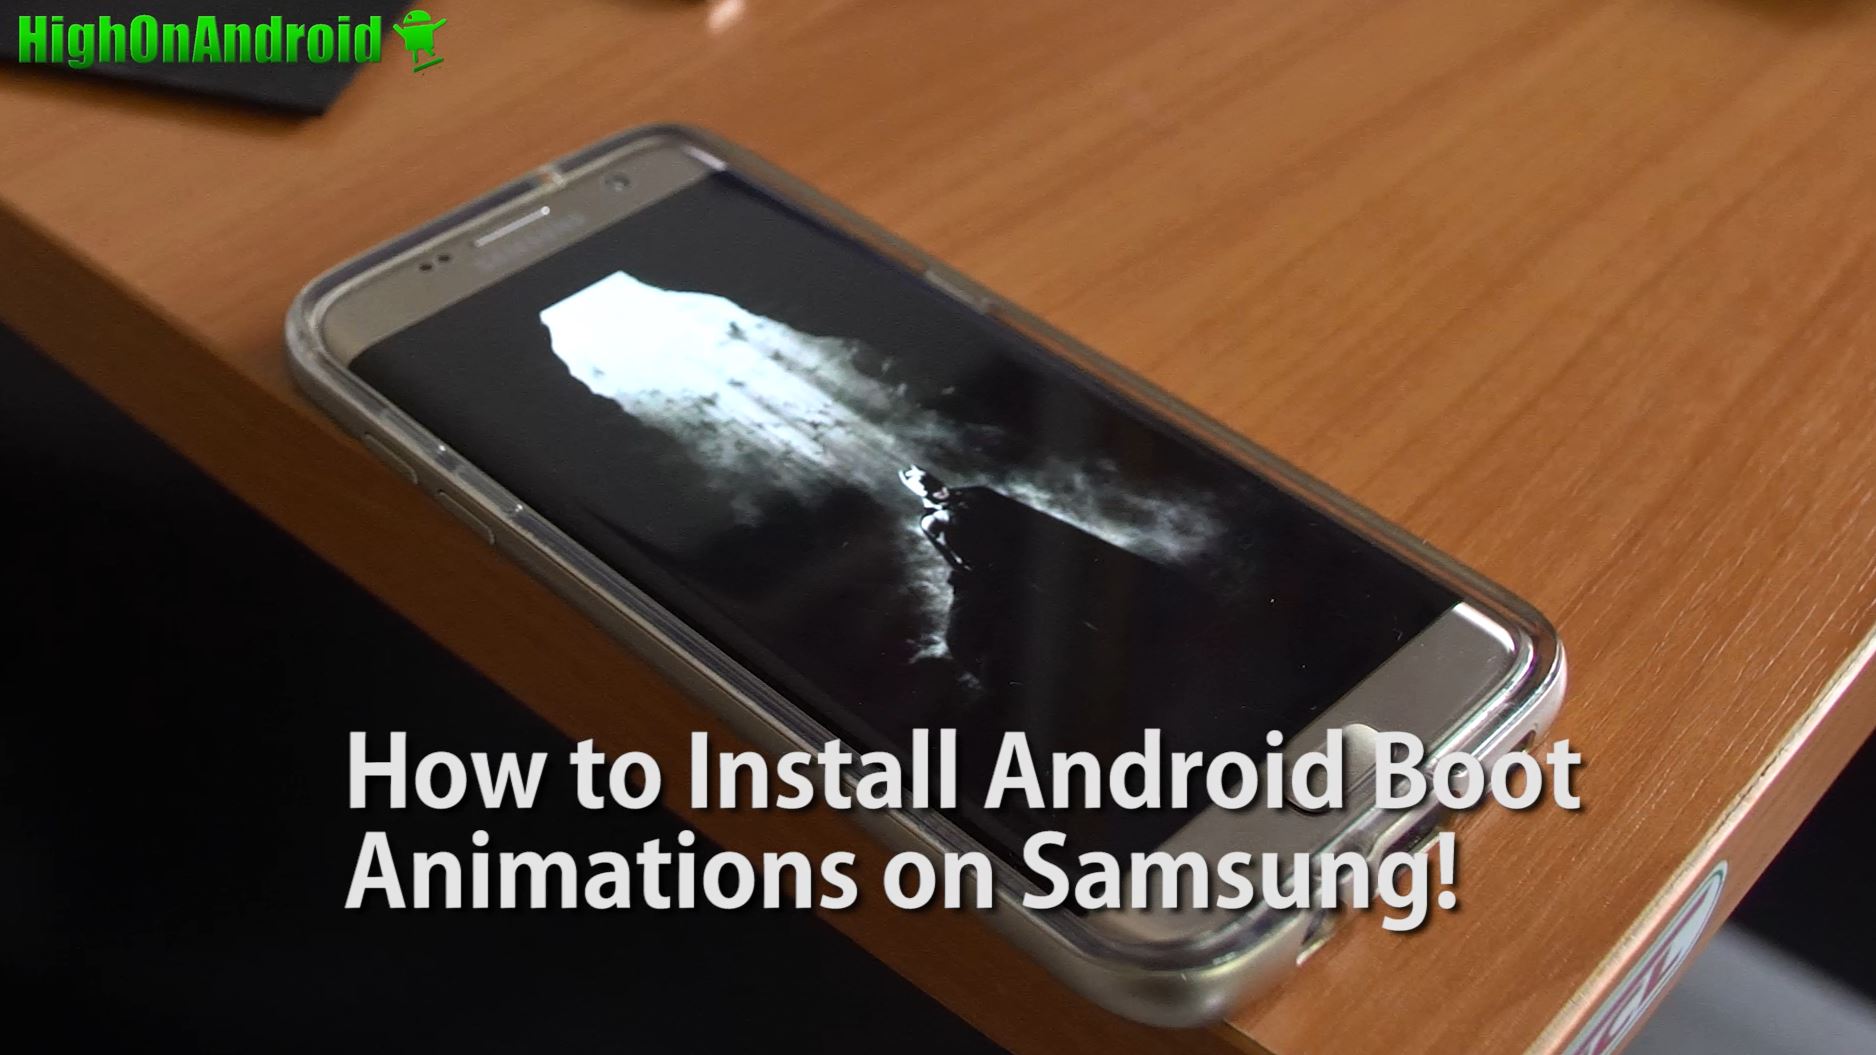 How to Install Android Boot Animations on Samsung Phone using QMG Files! |  